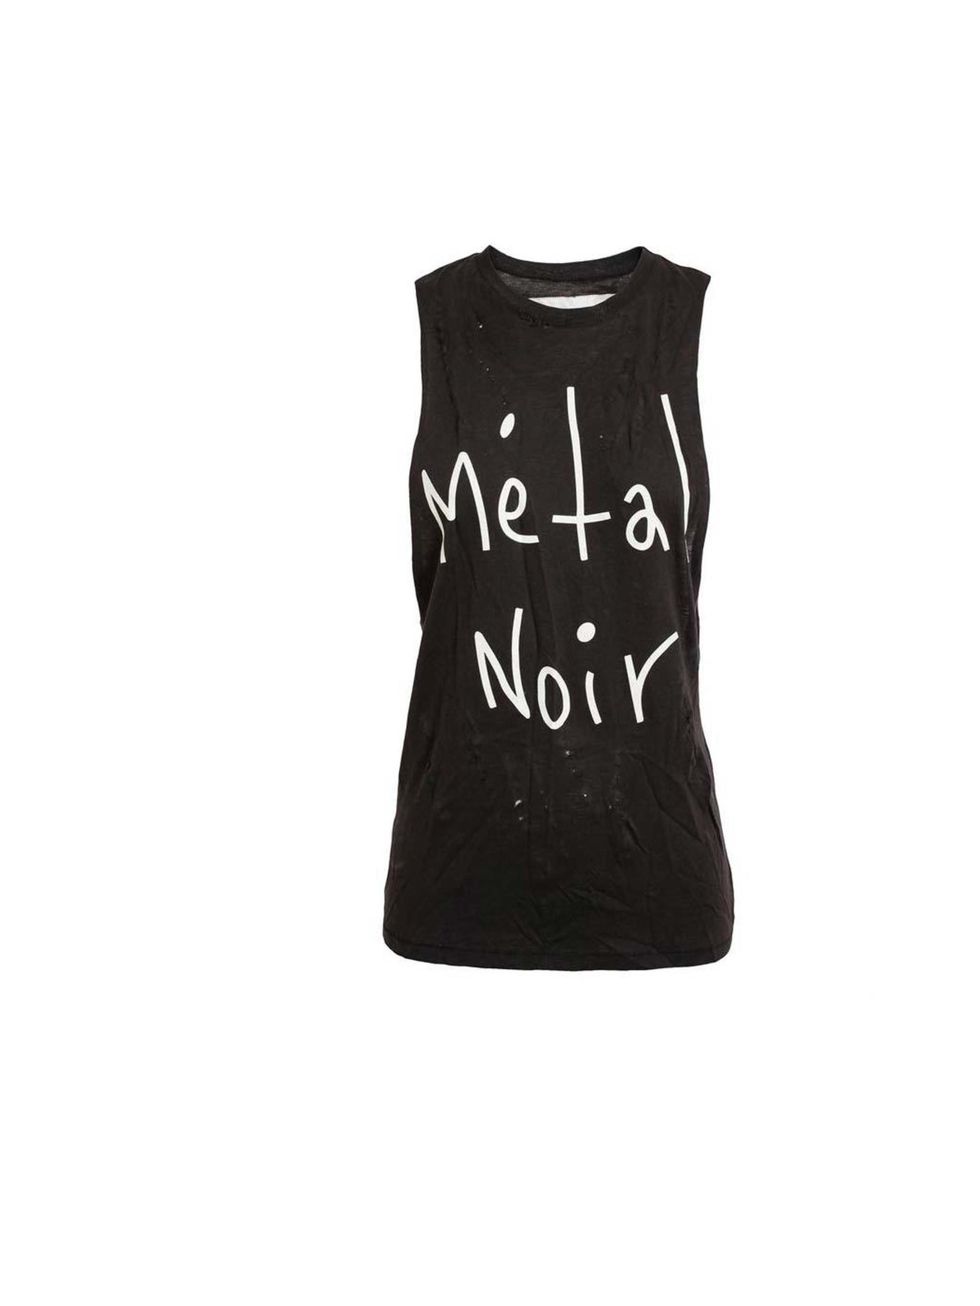 <p>Get the rebel look with a T-shirt like this from Enfant riches deprimes, available at <a href="http://www.brownsfashion.com/product/034625710003/042/unisex-metal-noir-motif-distressed-tank">Browns</a> £100</p>